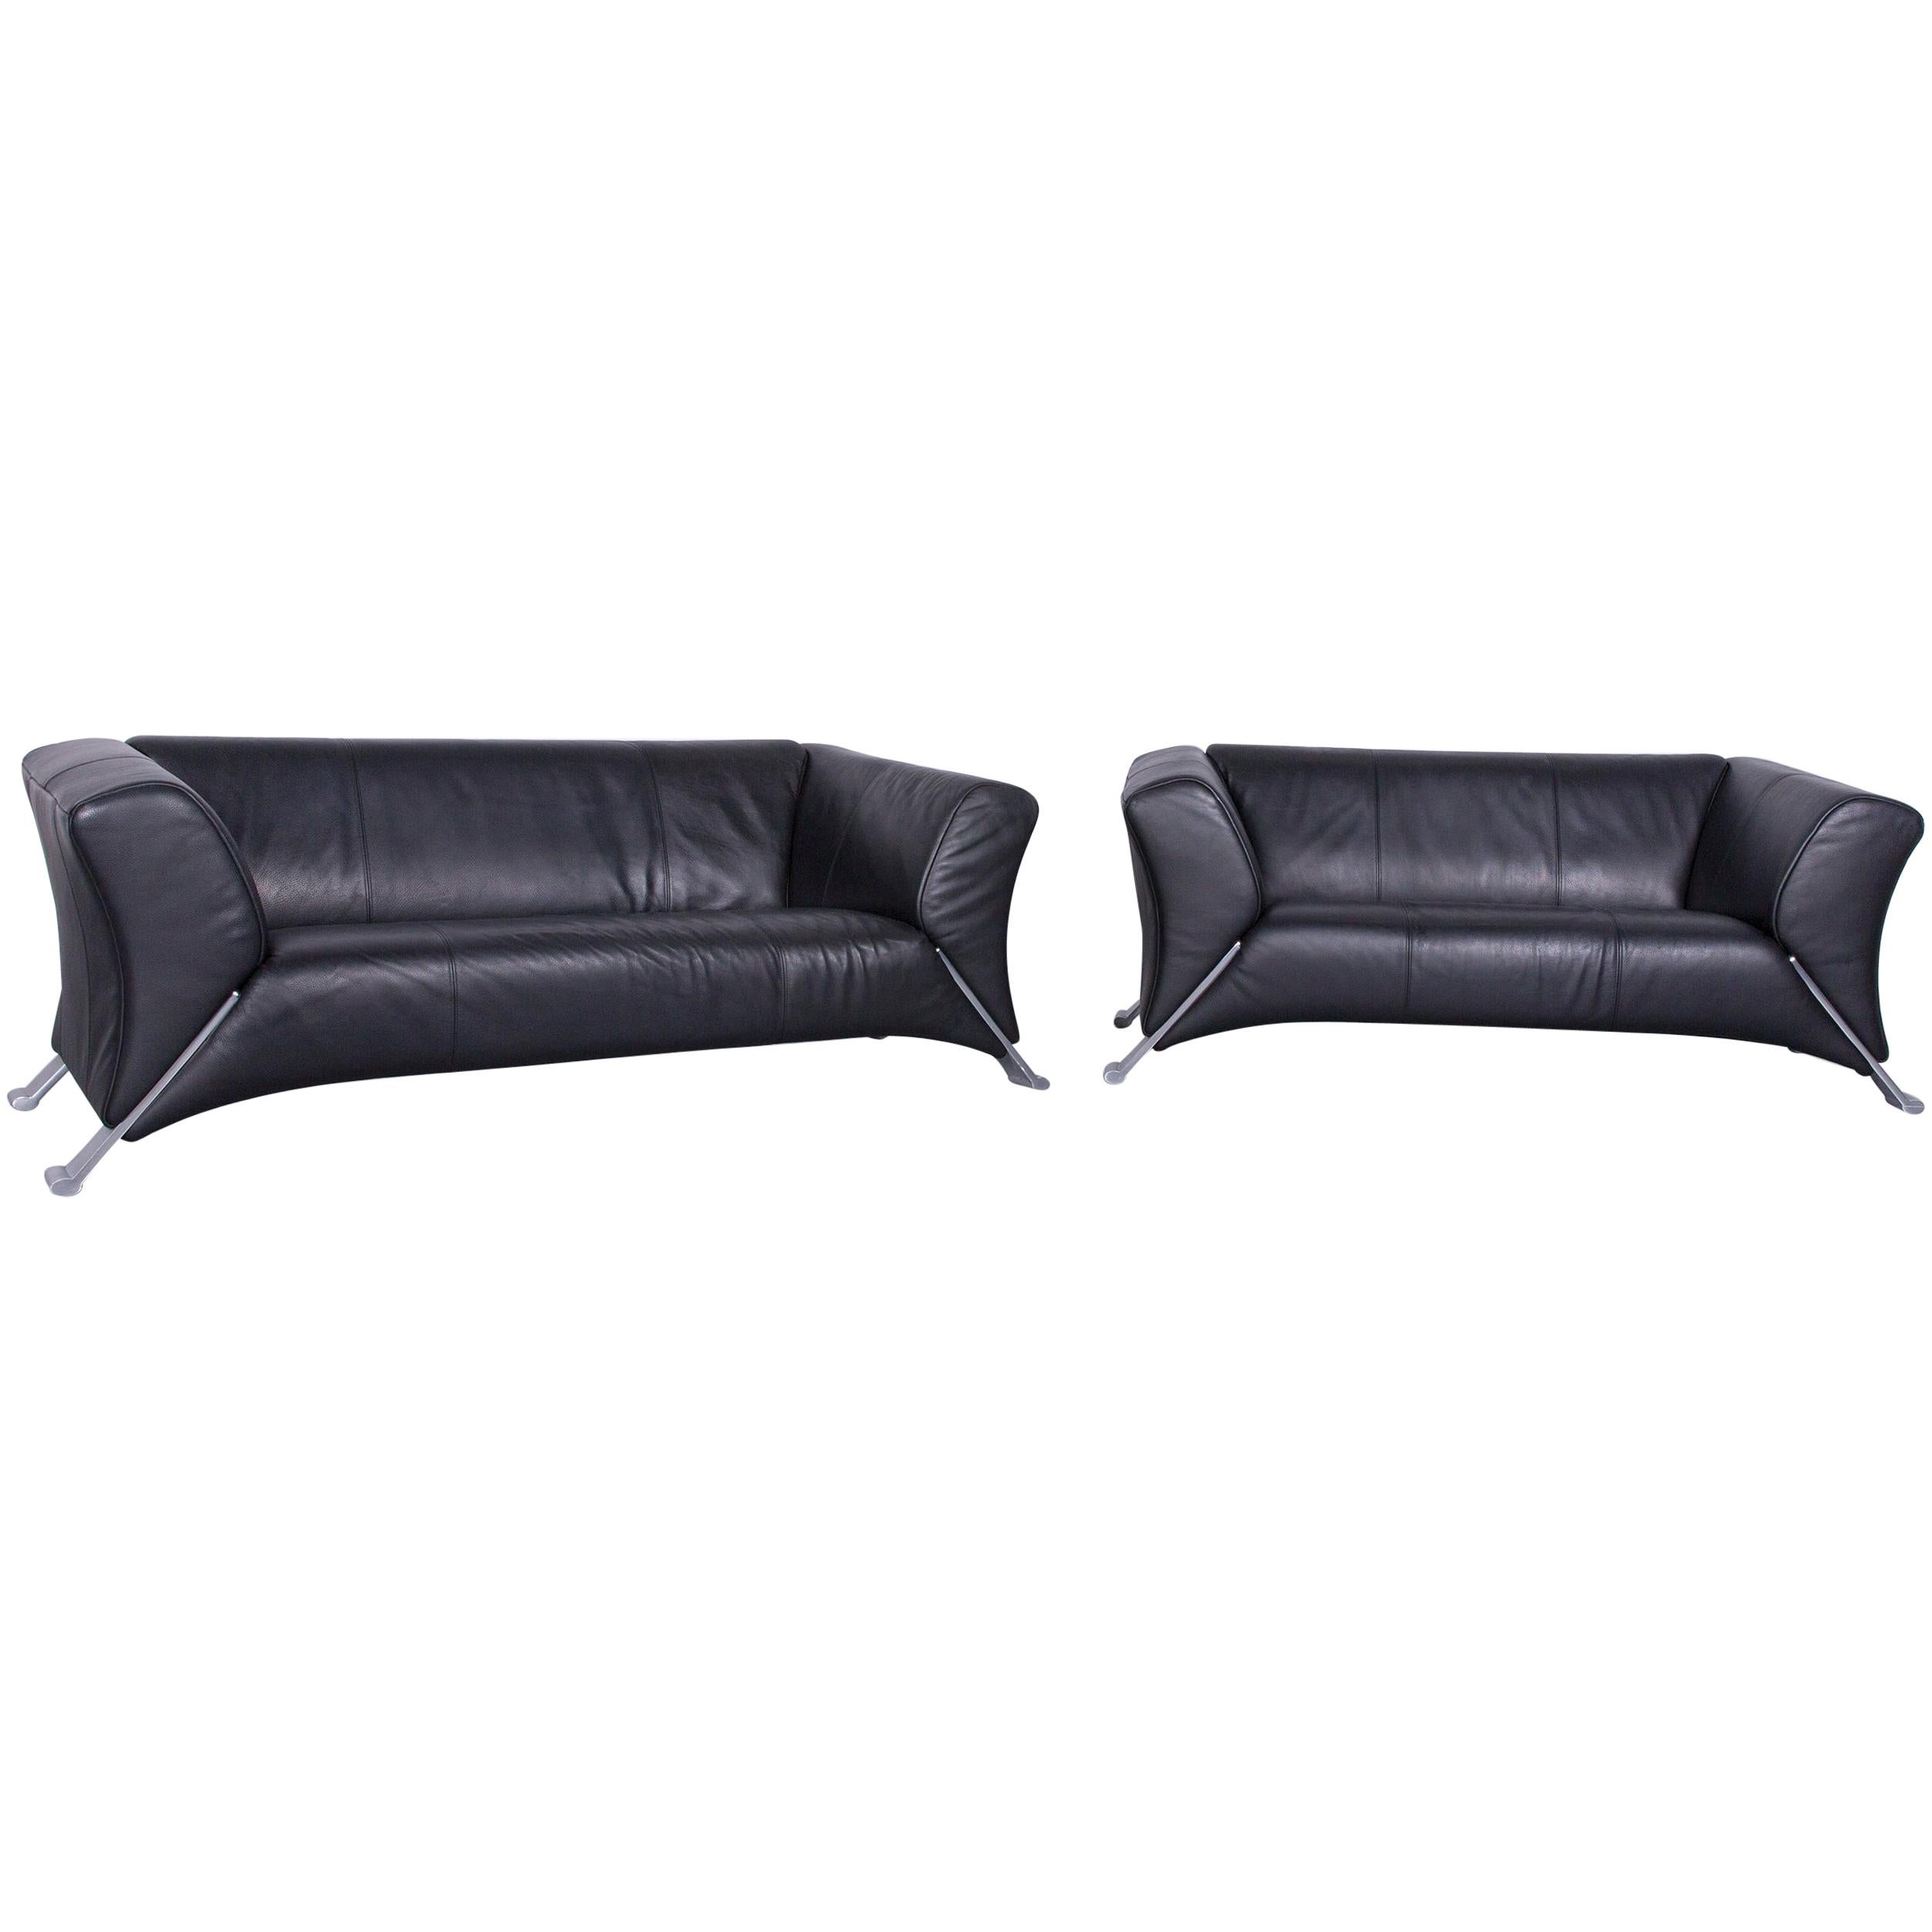 Rolf Benz 322 Designer Sofa Set Black Two-Seat Leather Couch